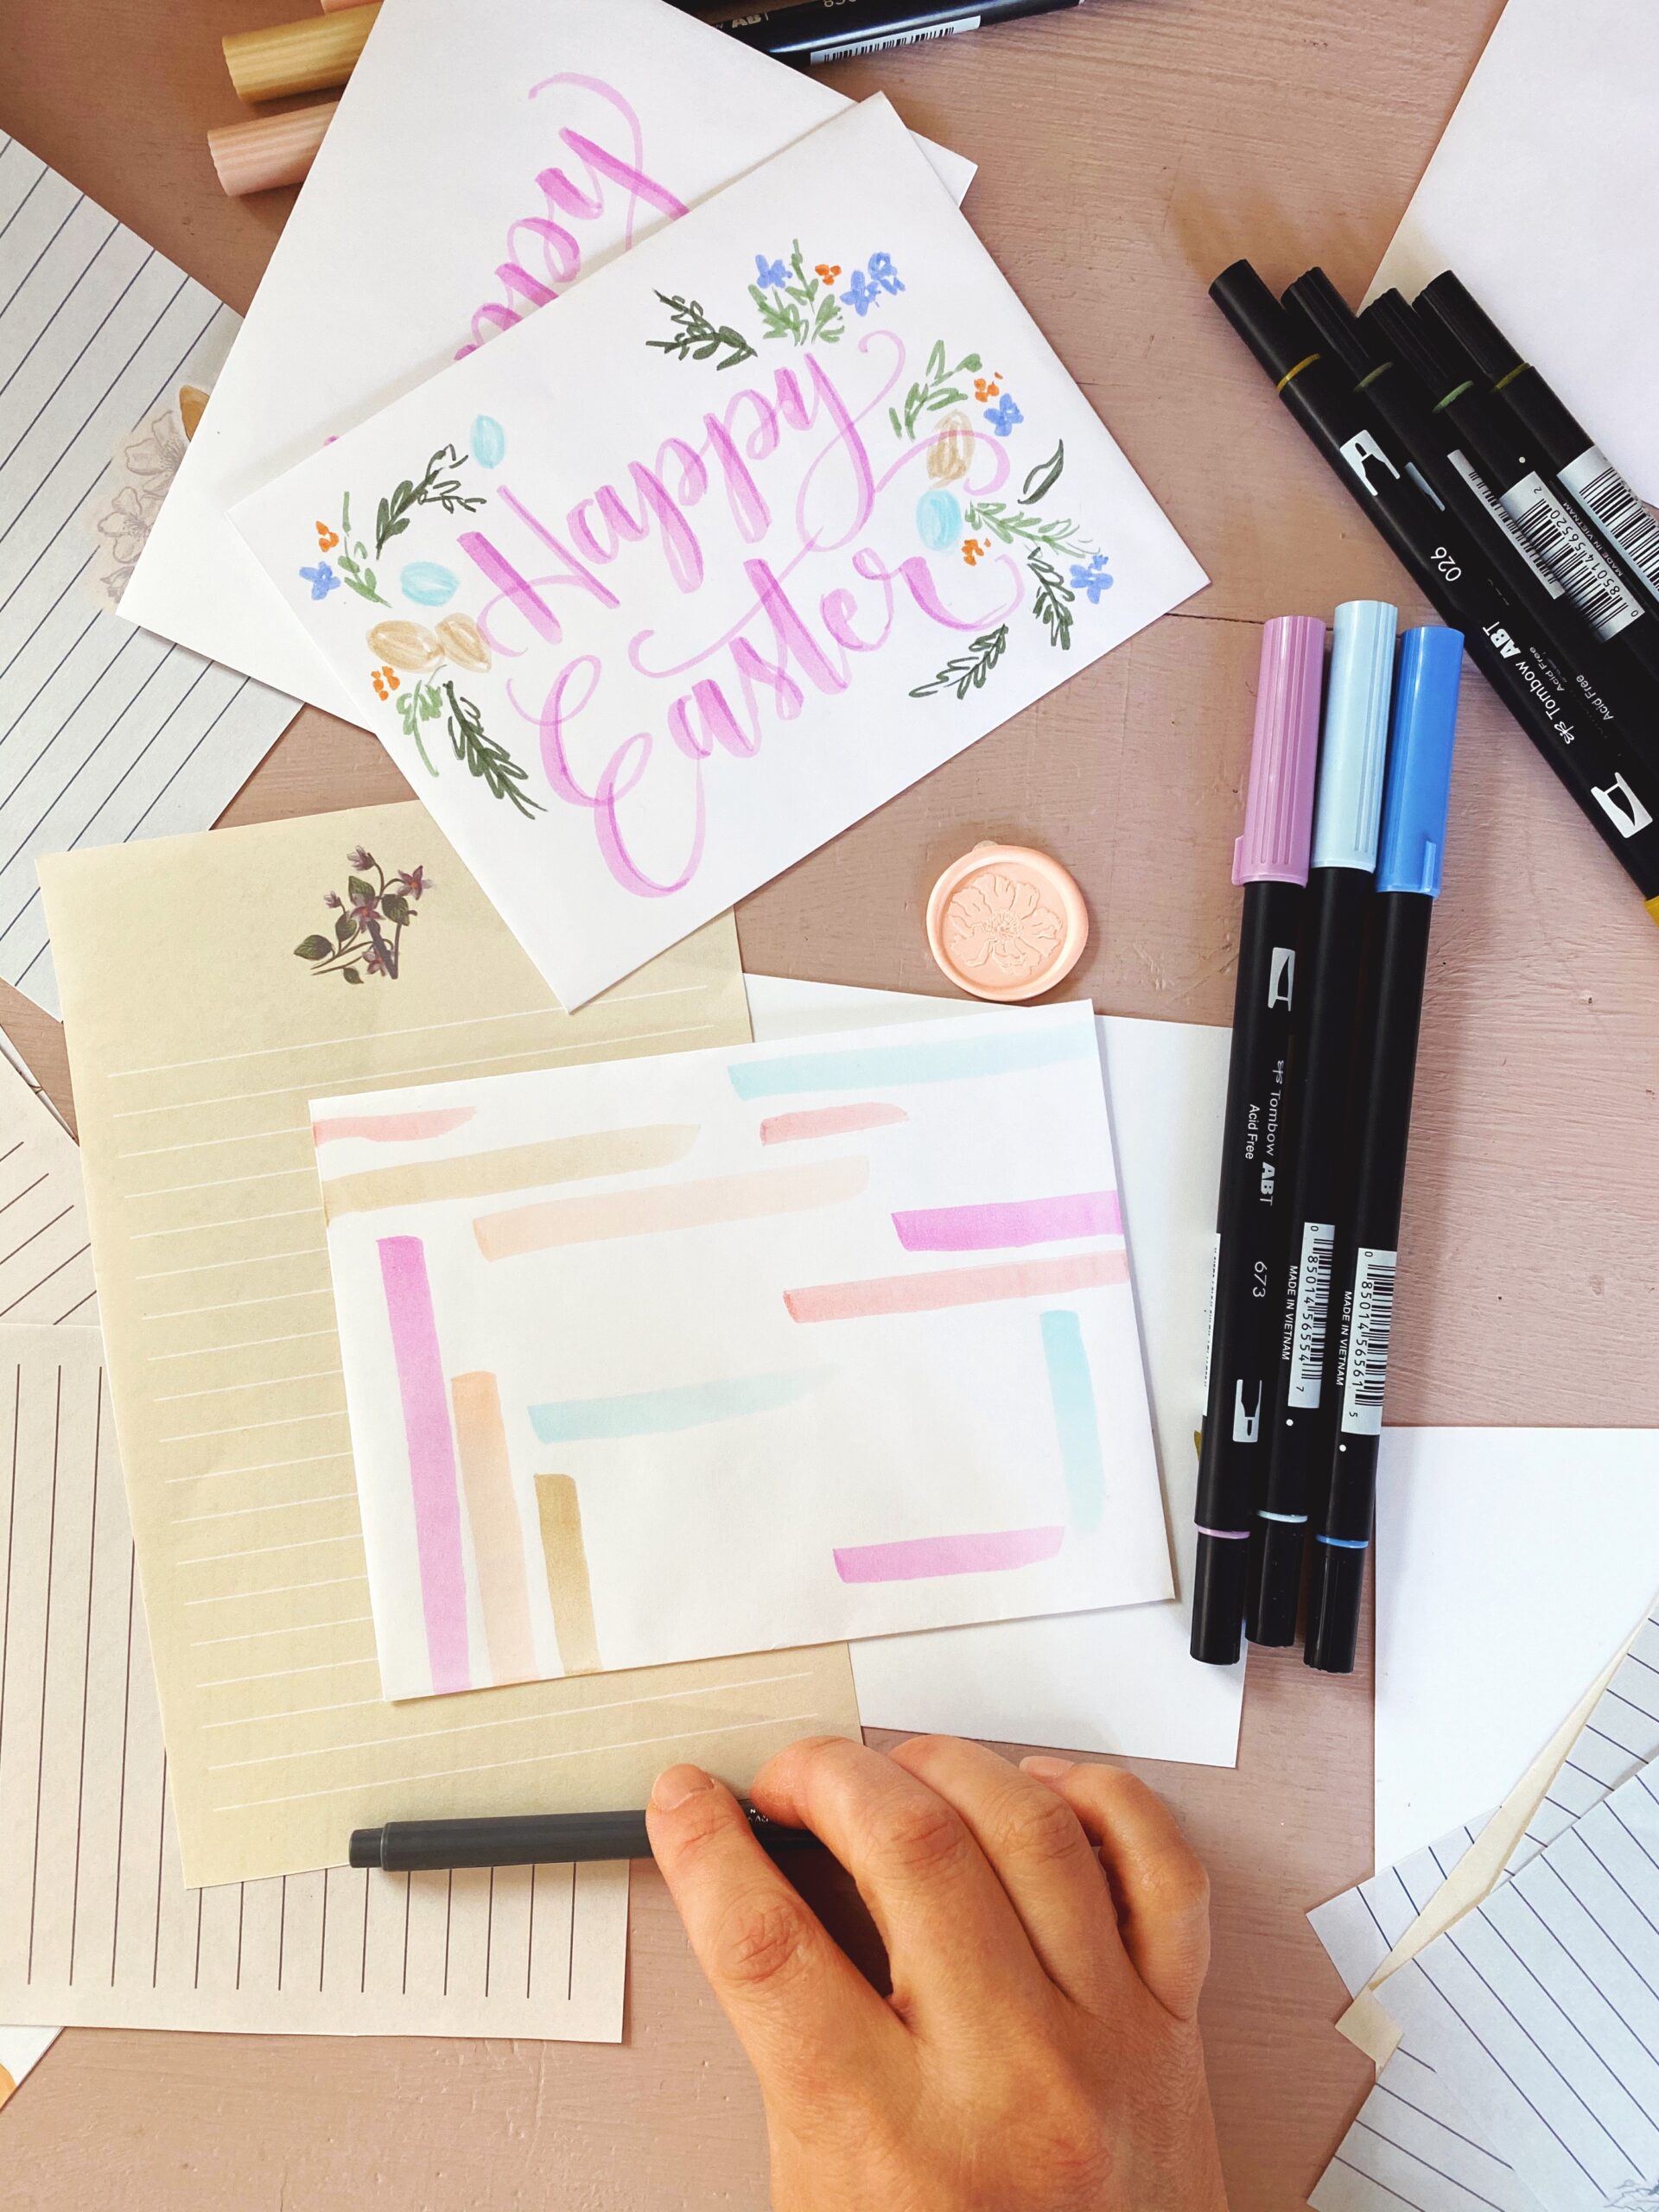 Easter Snail Mail Ideas for National Letter Writing Month | Mail art | Snail Mail Art | Letters